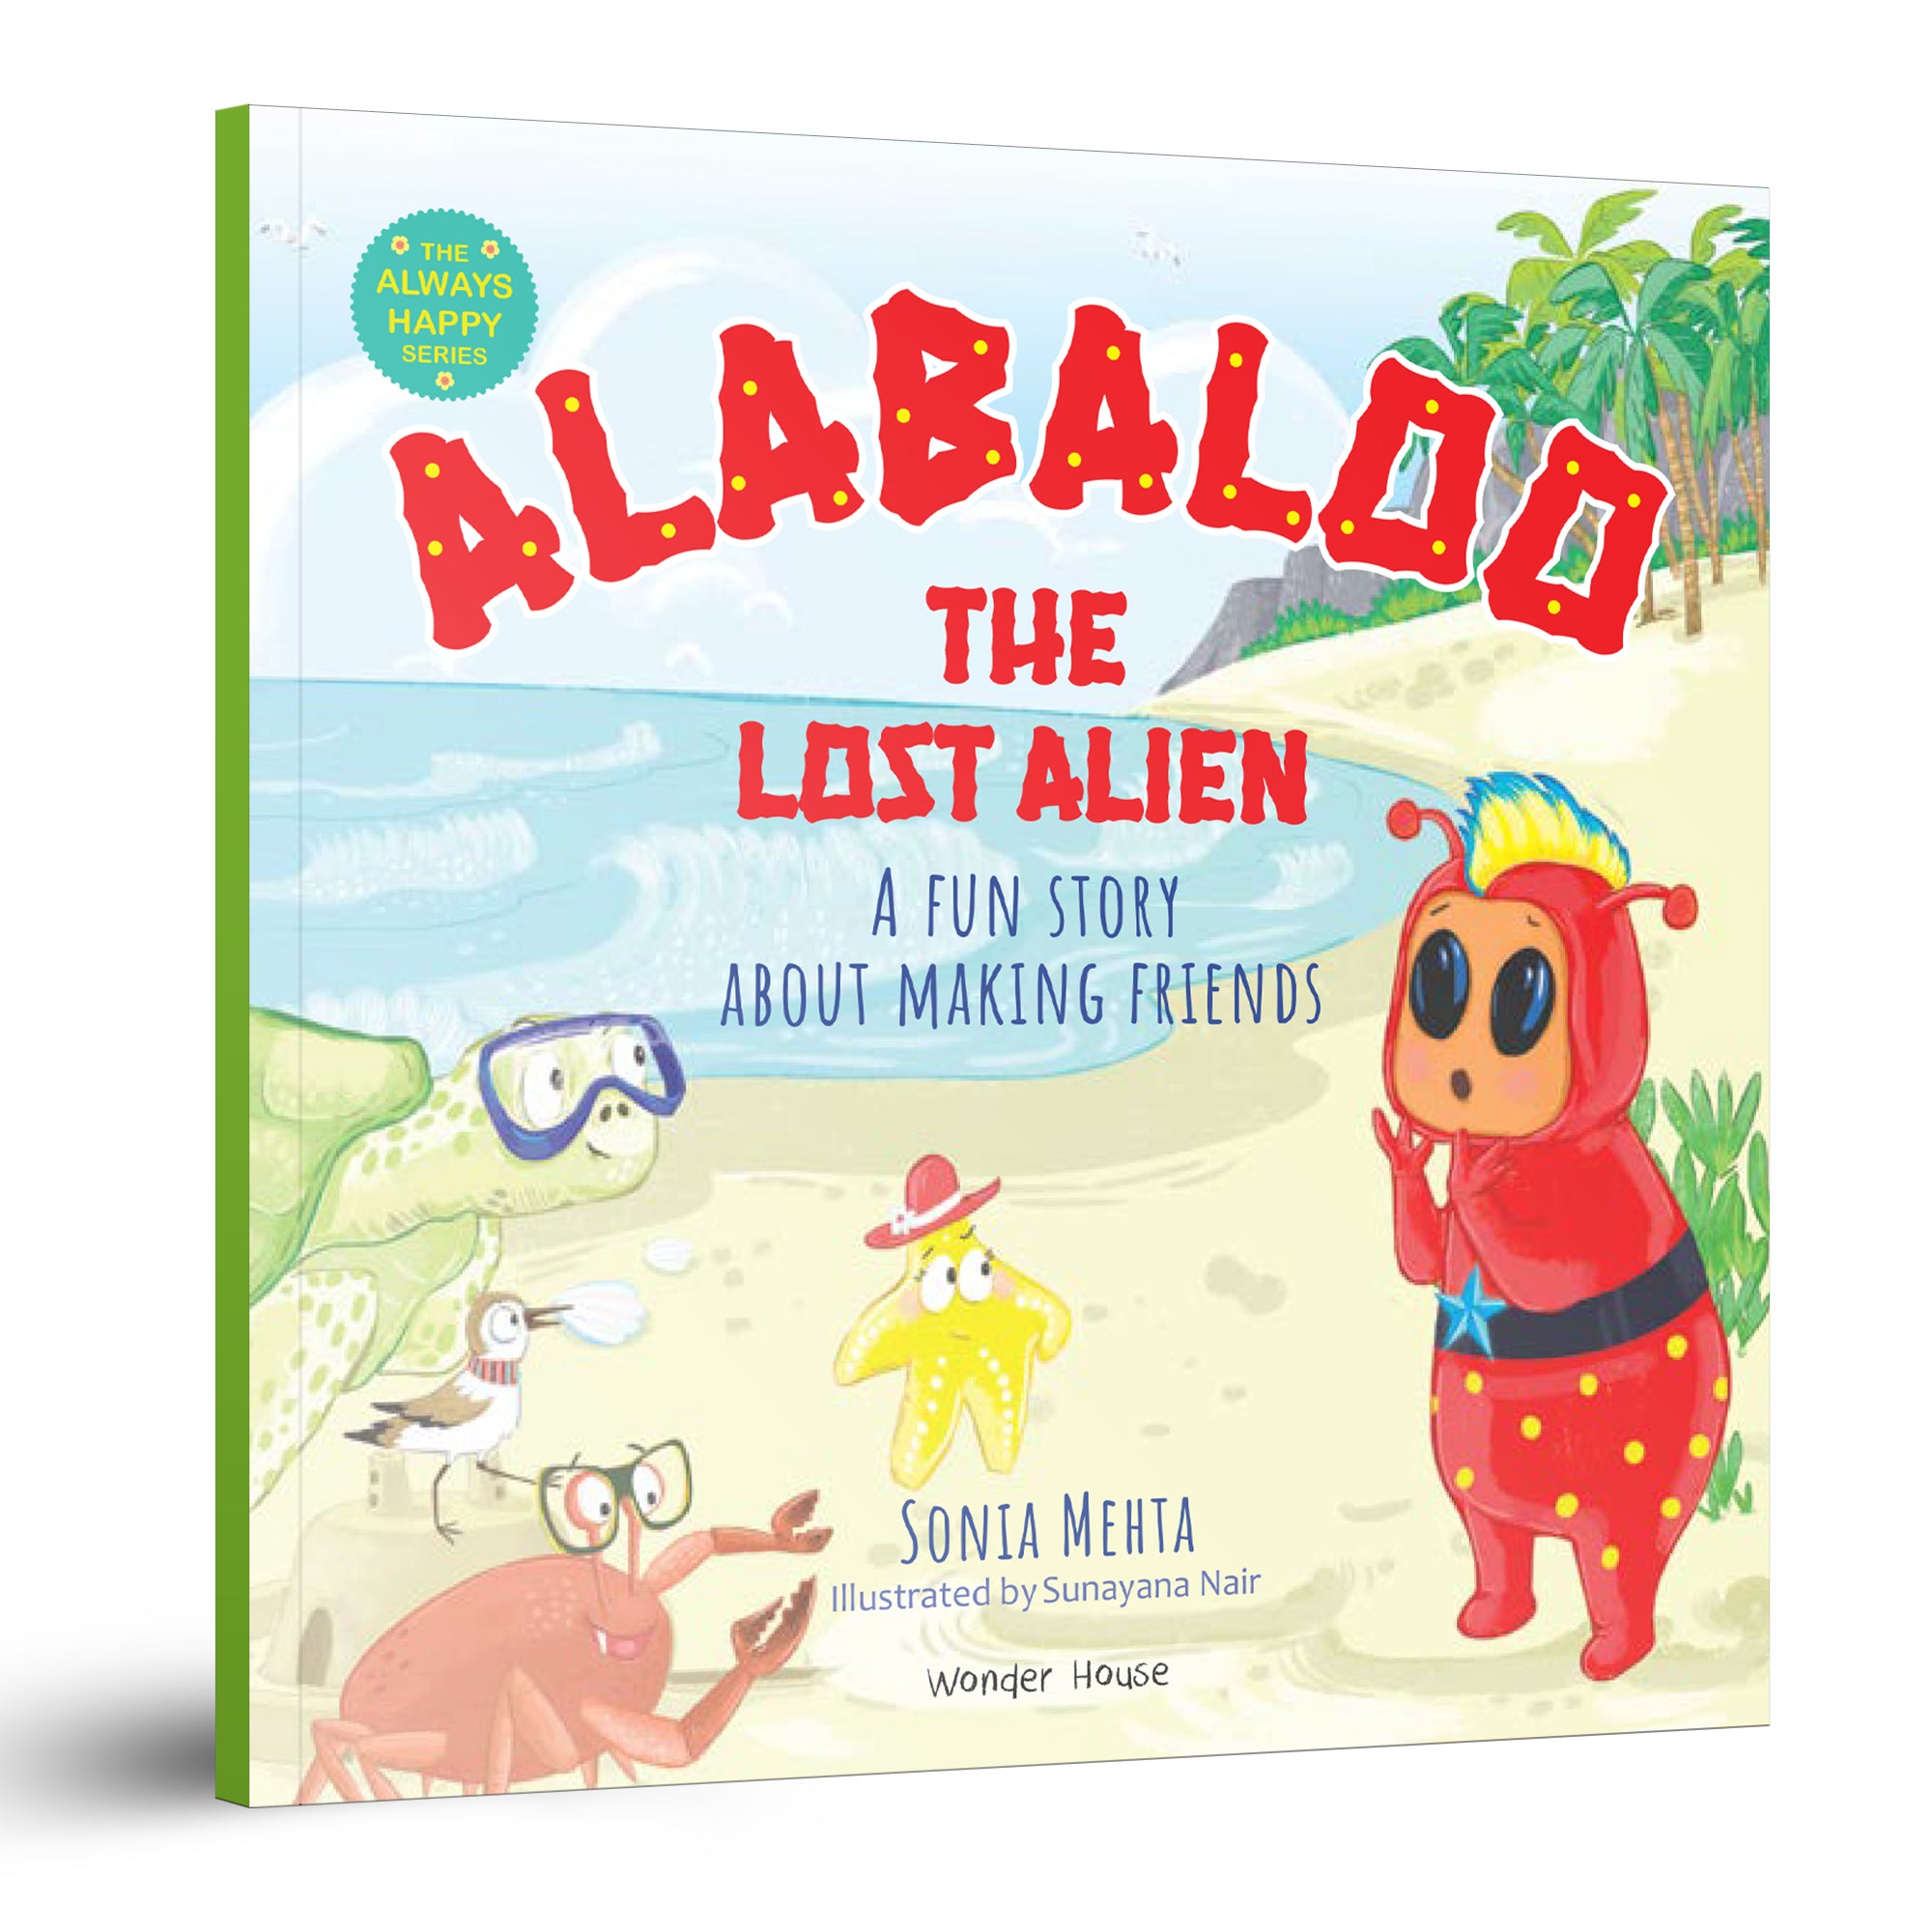 The Always Happy Series: Alabaloo The Lost Alien - A fun Story About Making Friends - Beautifully Illustrated Picture Book For Children